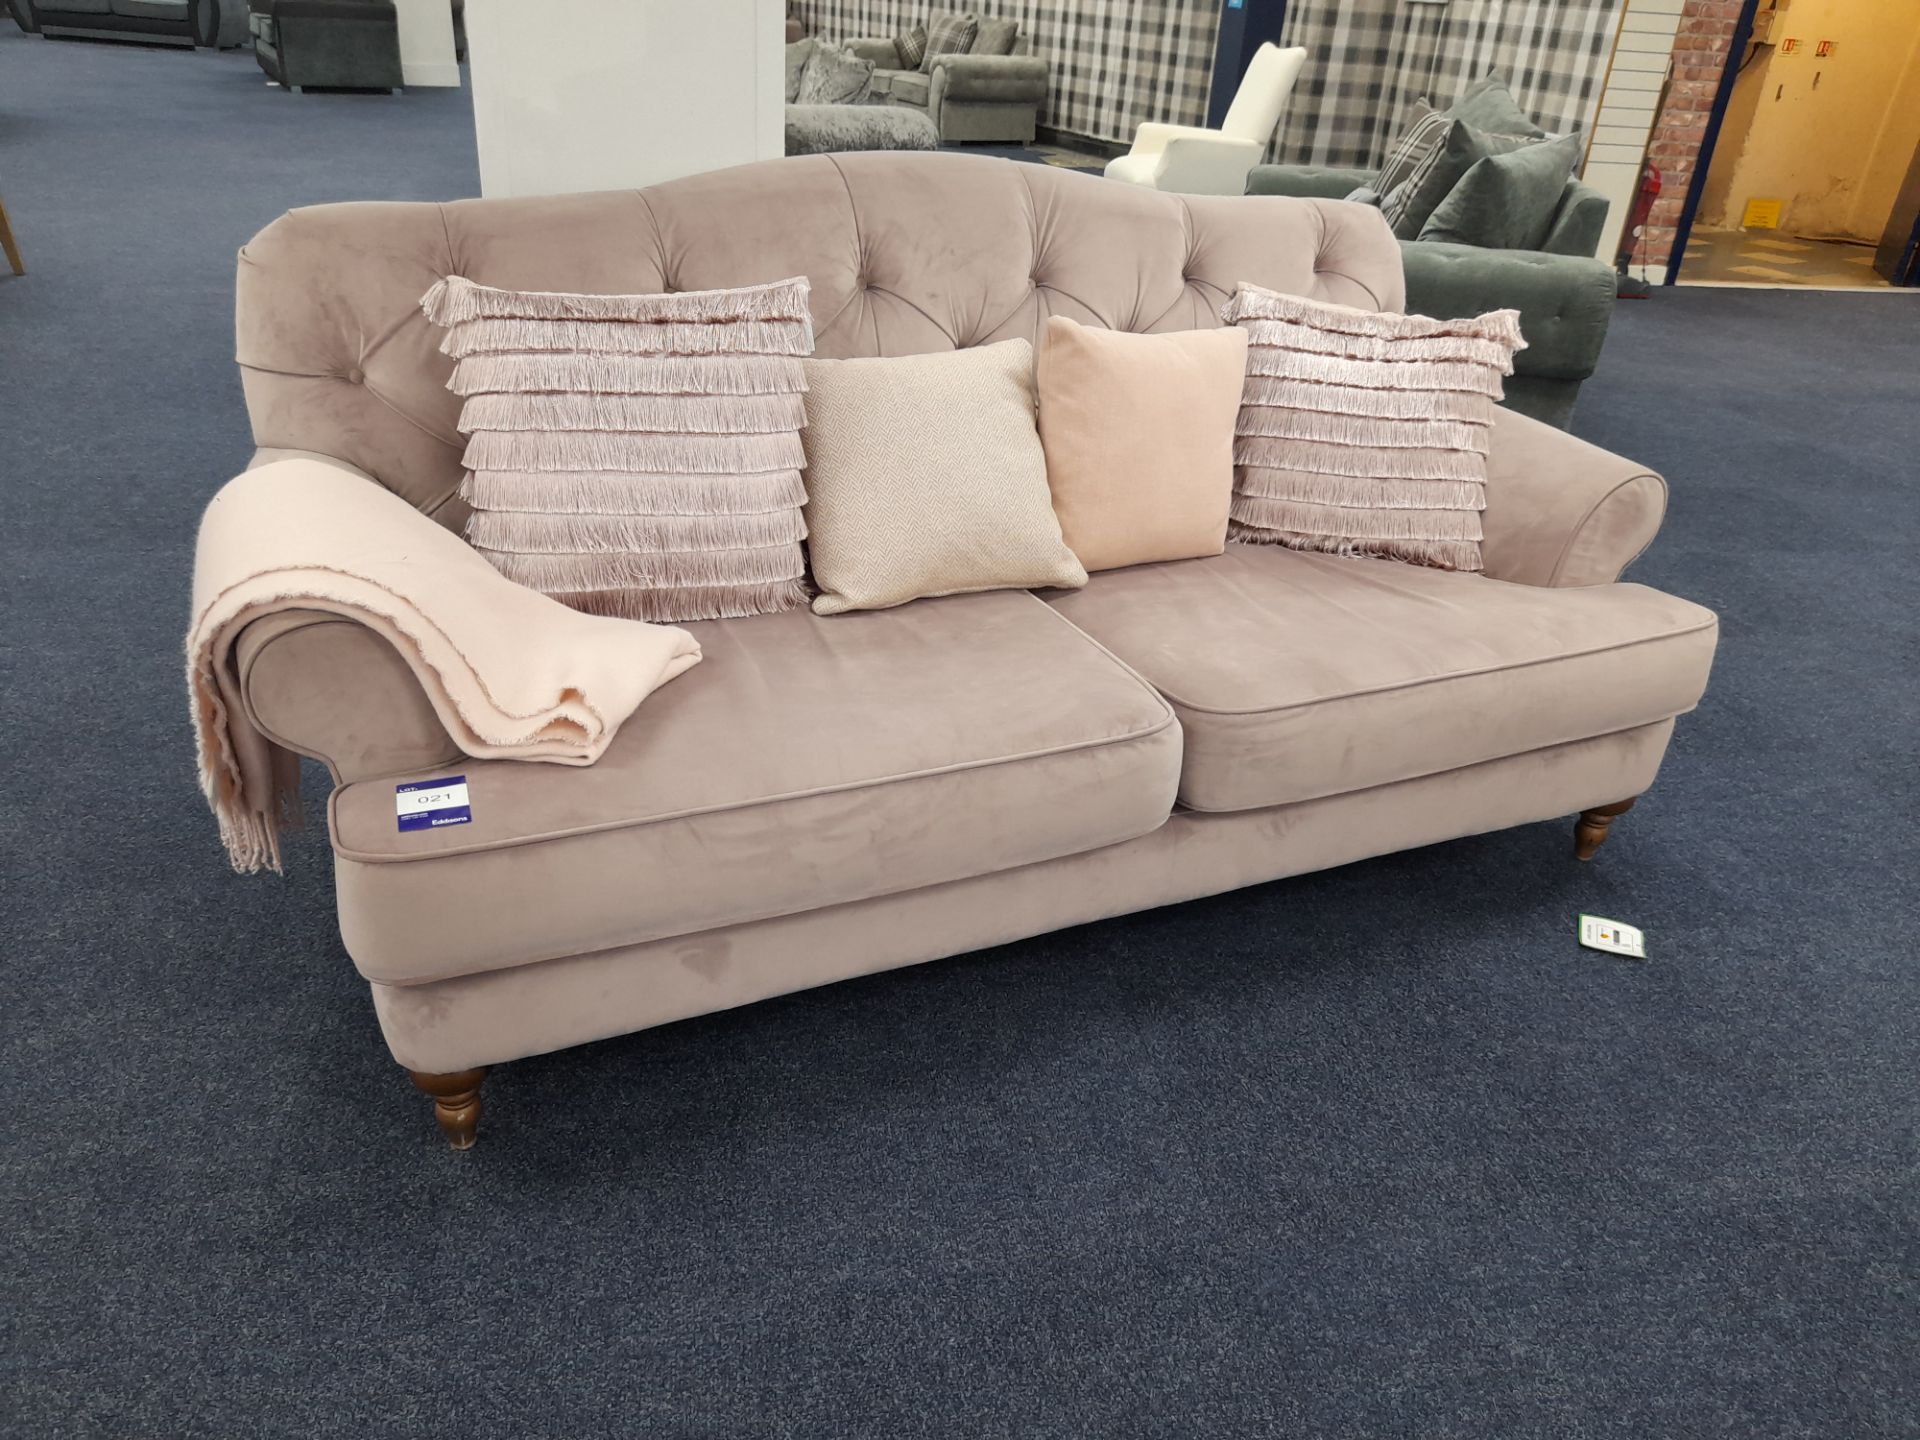 Pink fabric upholstered, 3 seater, chesterfield type sofa (Ex-Display)